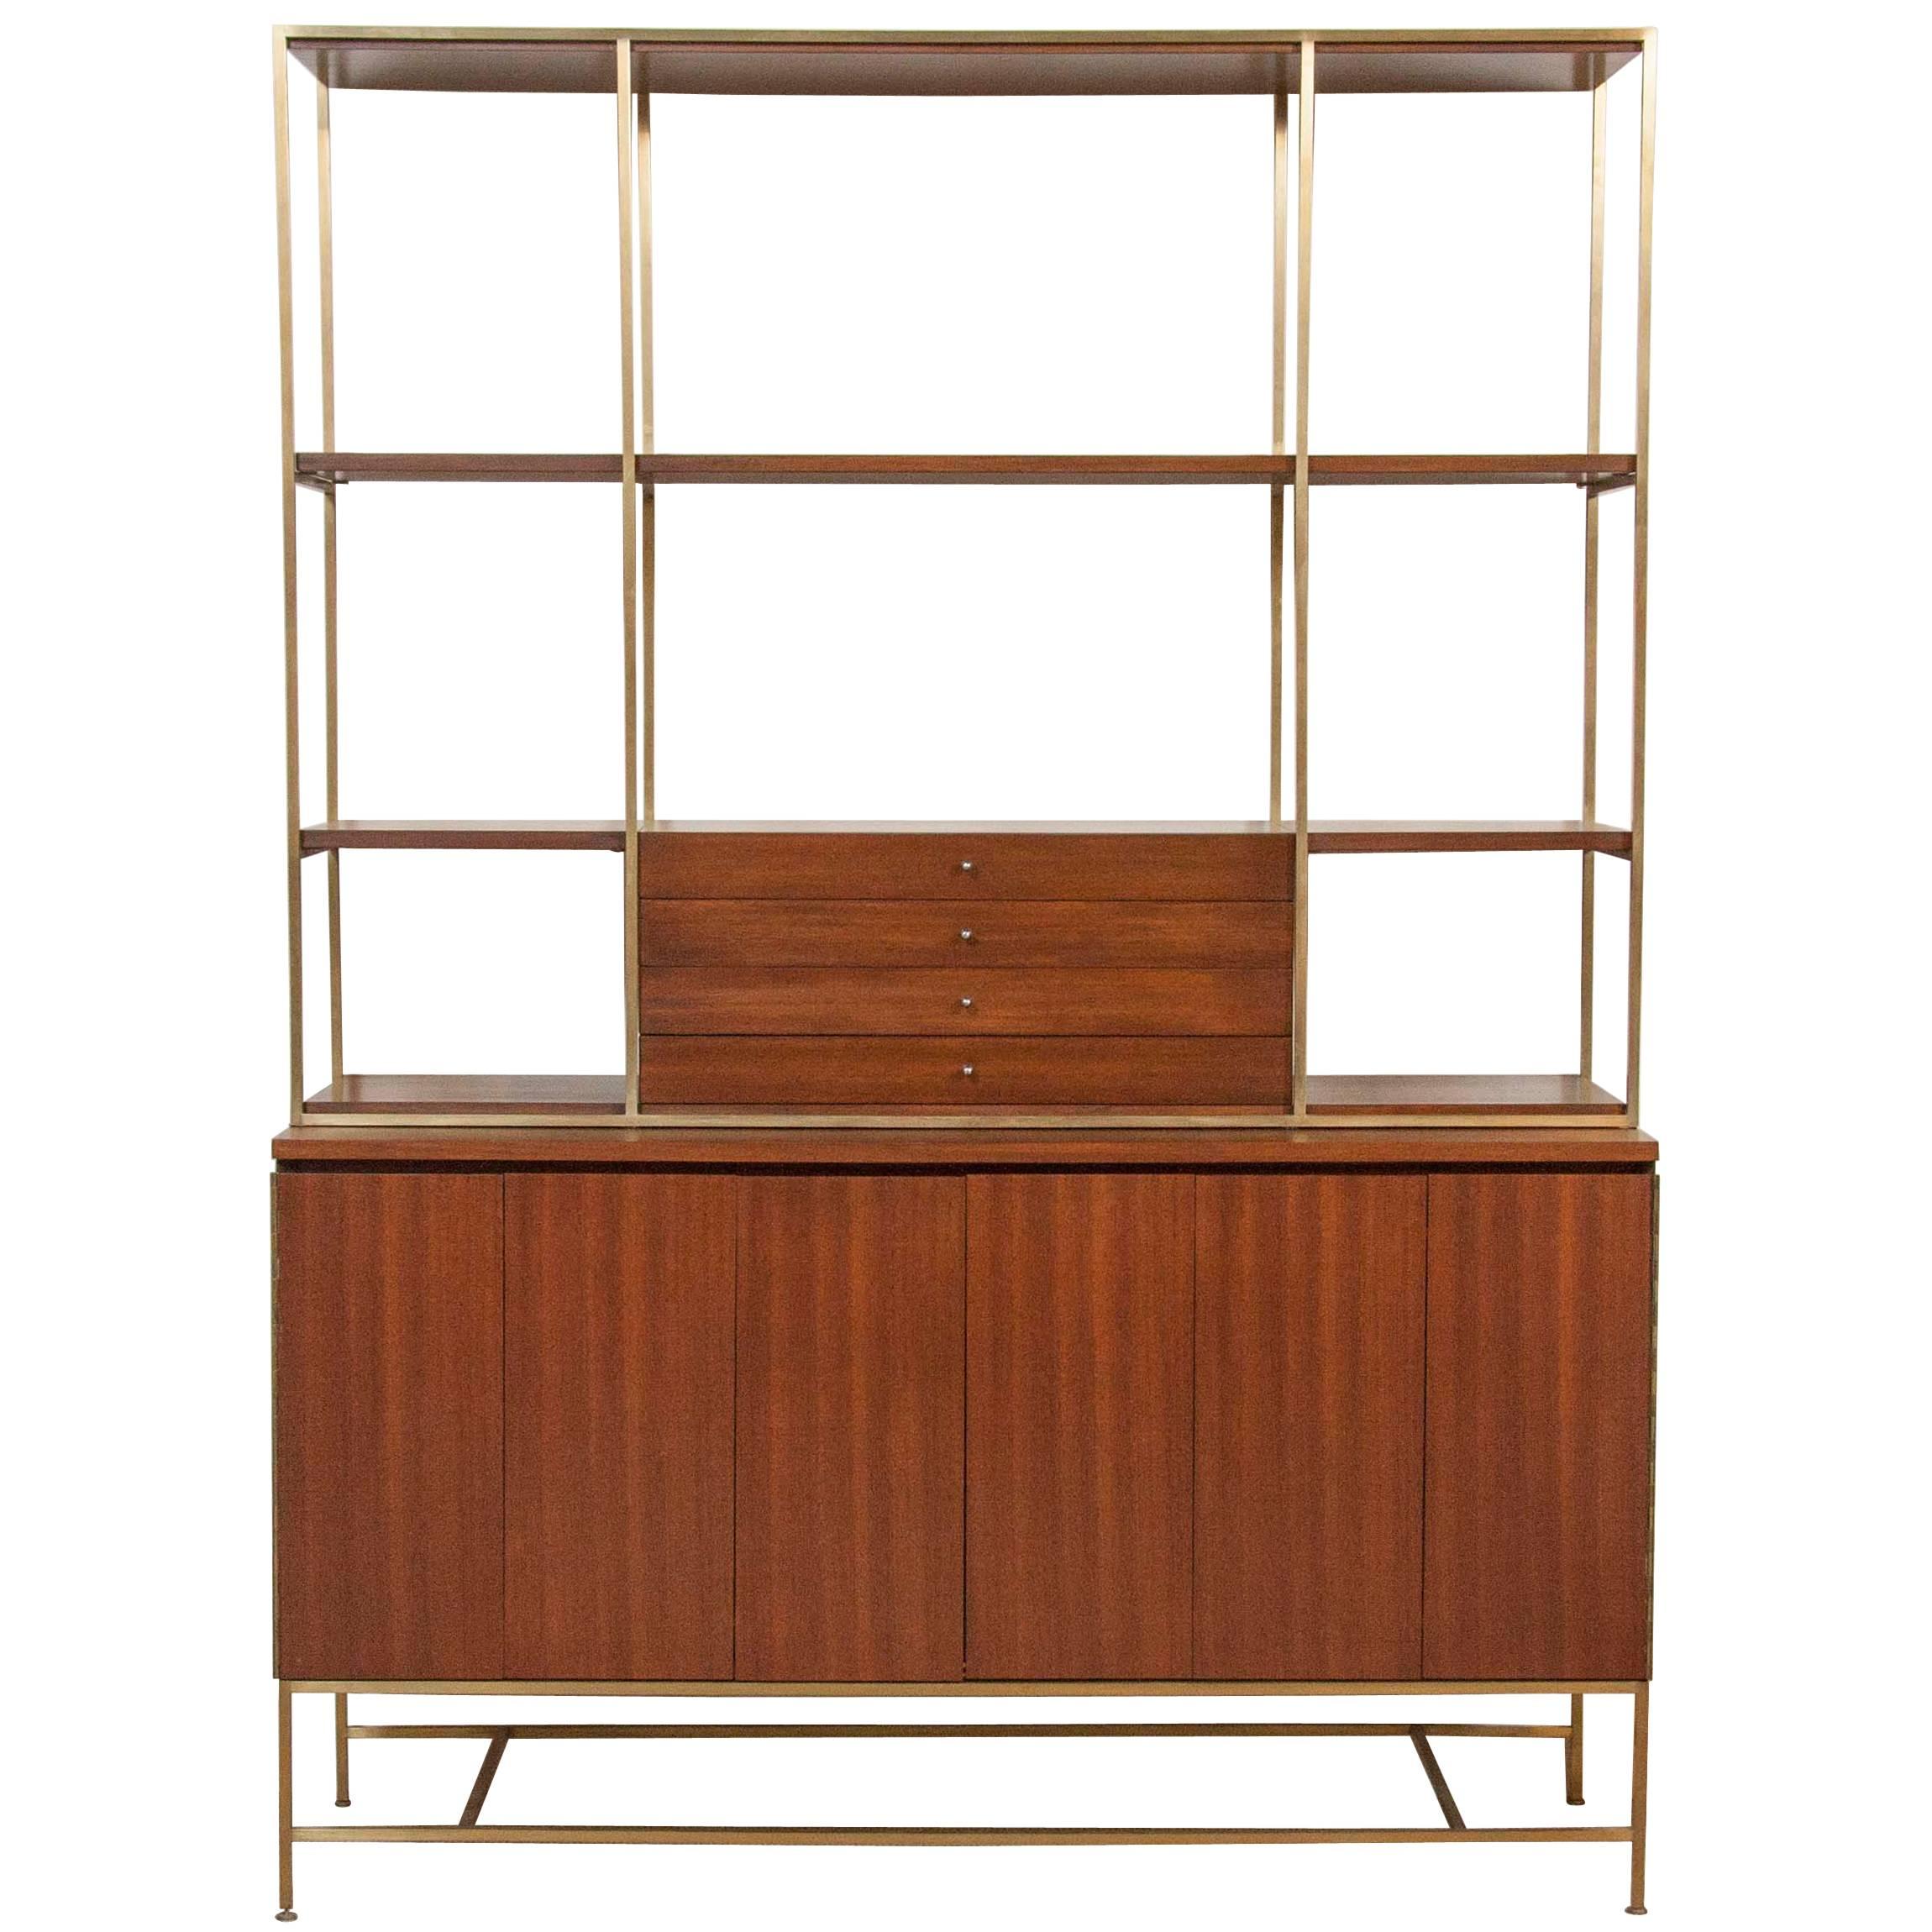 A Paul McCobb Walnut And Brass Bookcase Produced By Calvin 